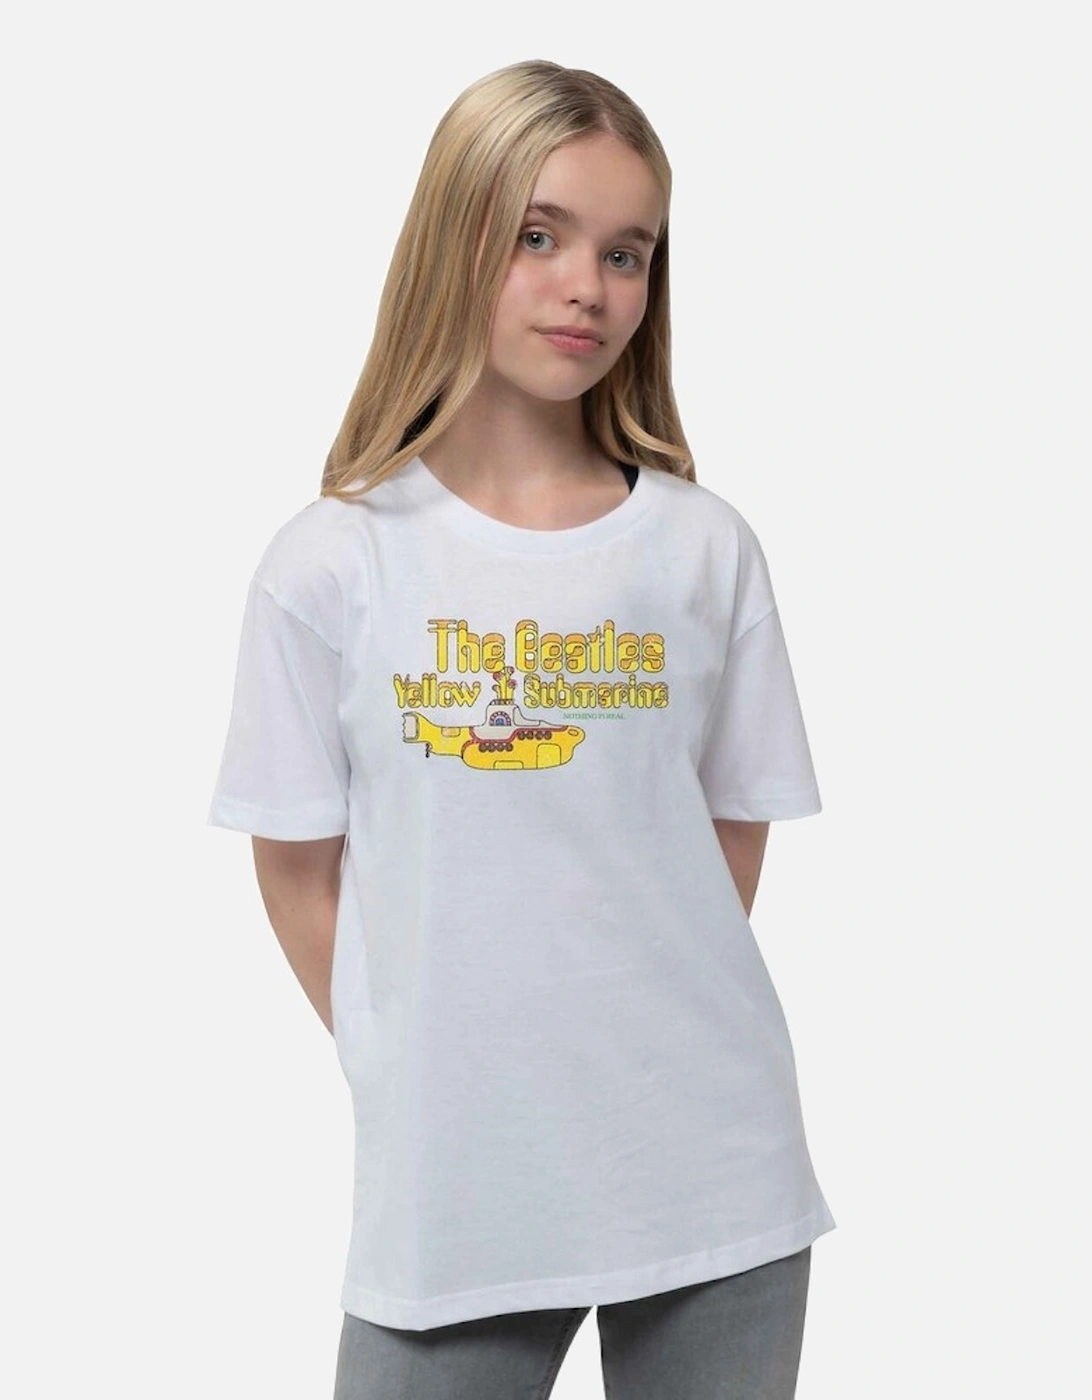 Childrens/Kids Yellow Submarine Nothing Is Real T-Shirt